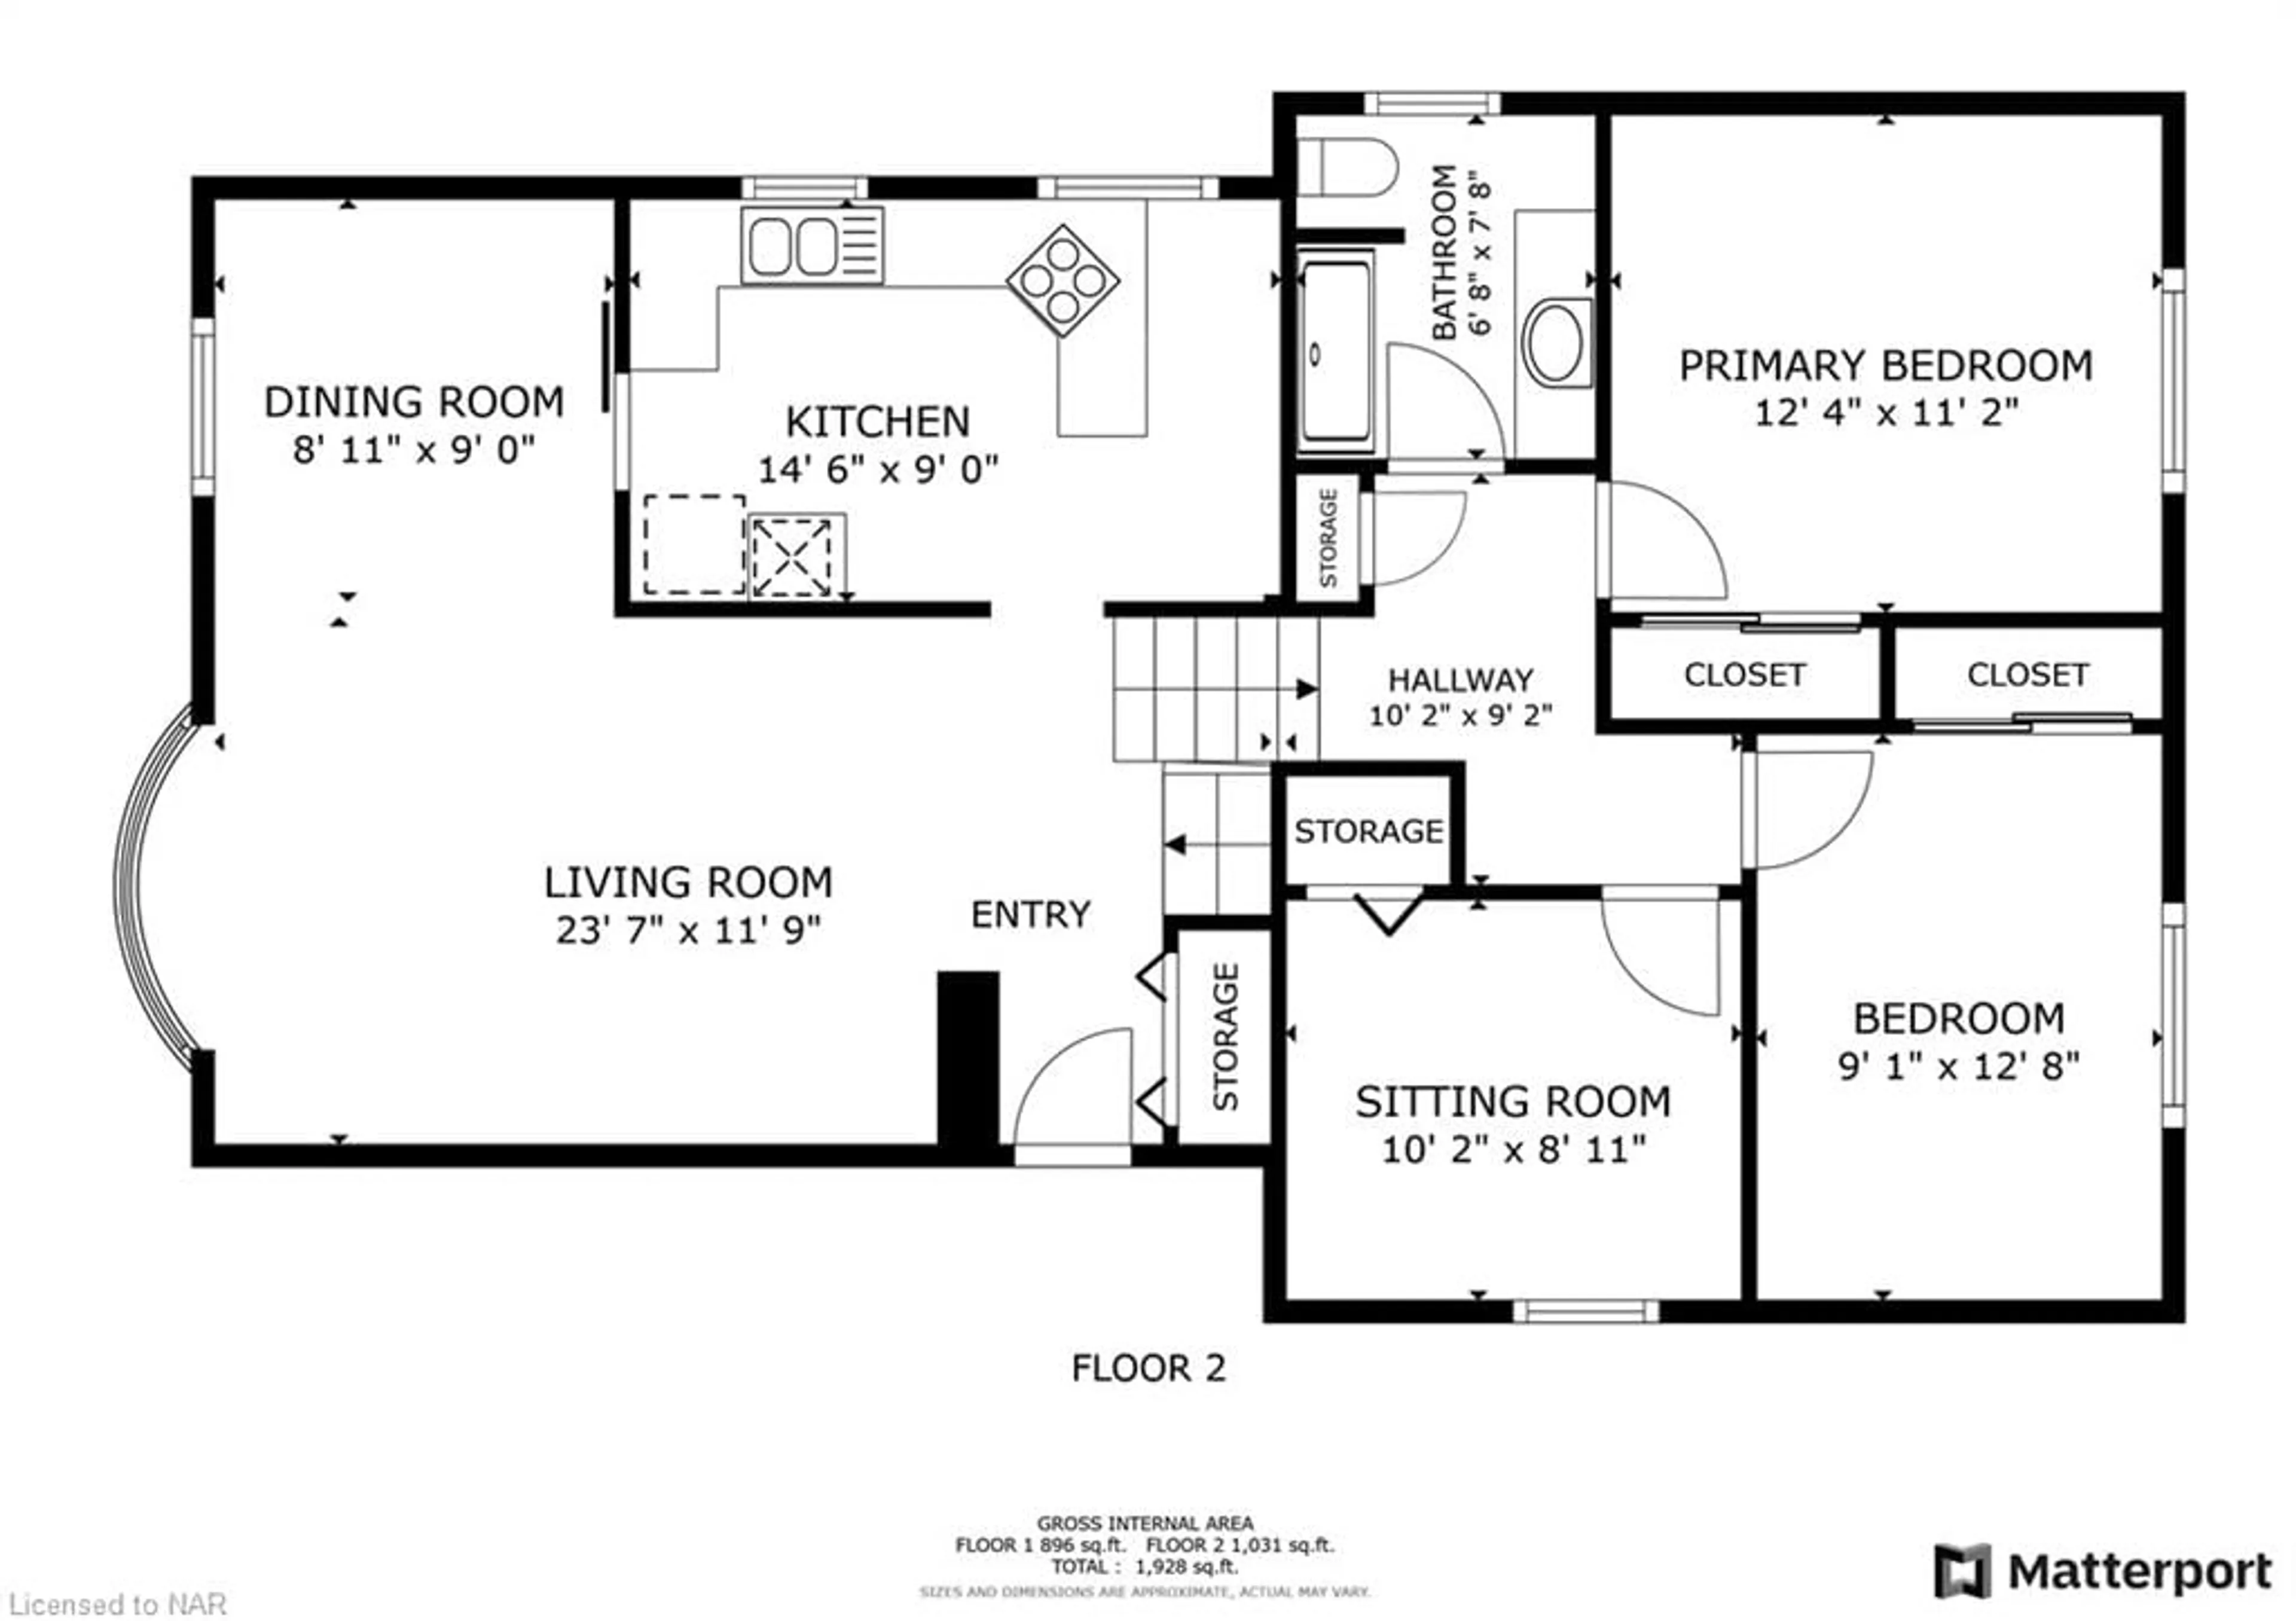 Floor plan for 66 Prince Charles Dr, St. Catharines Ontario L2N 3Z1